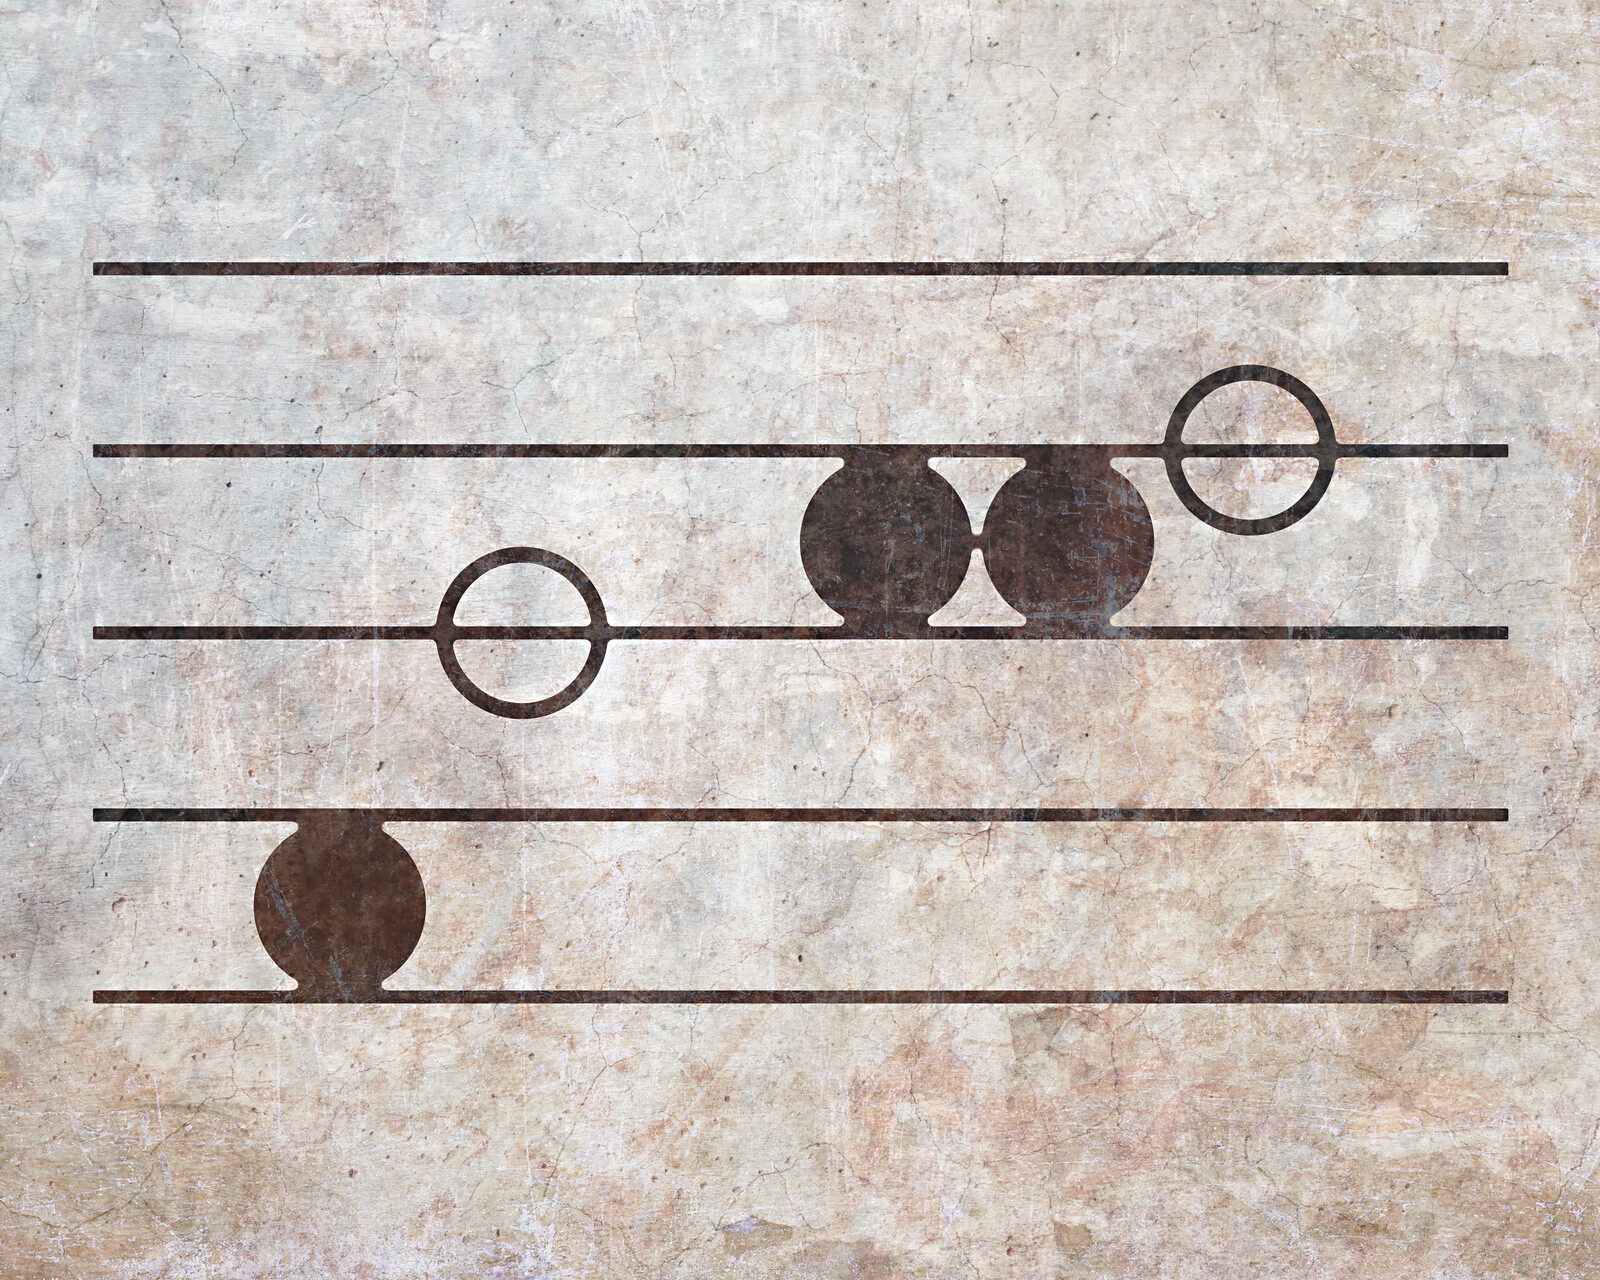 Circles and lines representing the first few measures of "The Spirit of God"